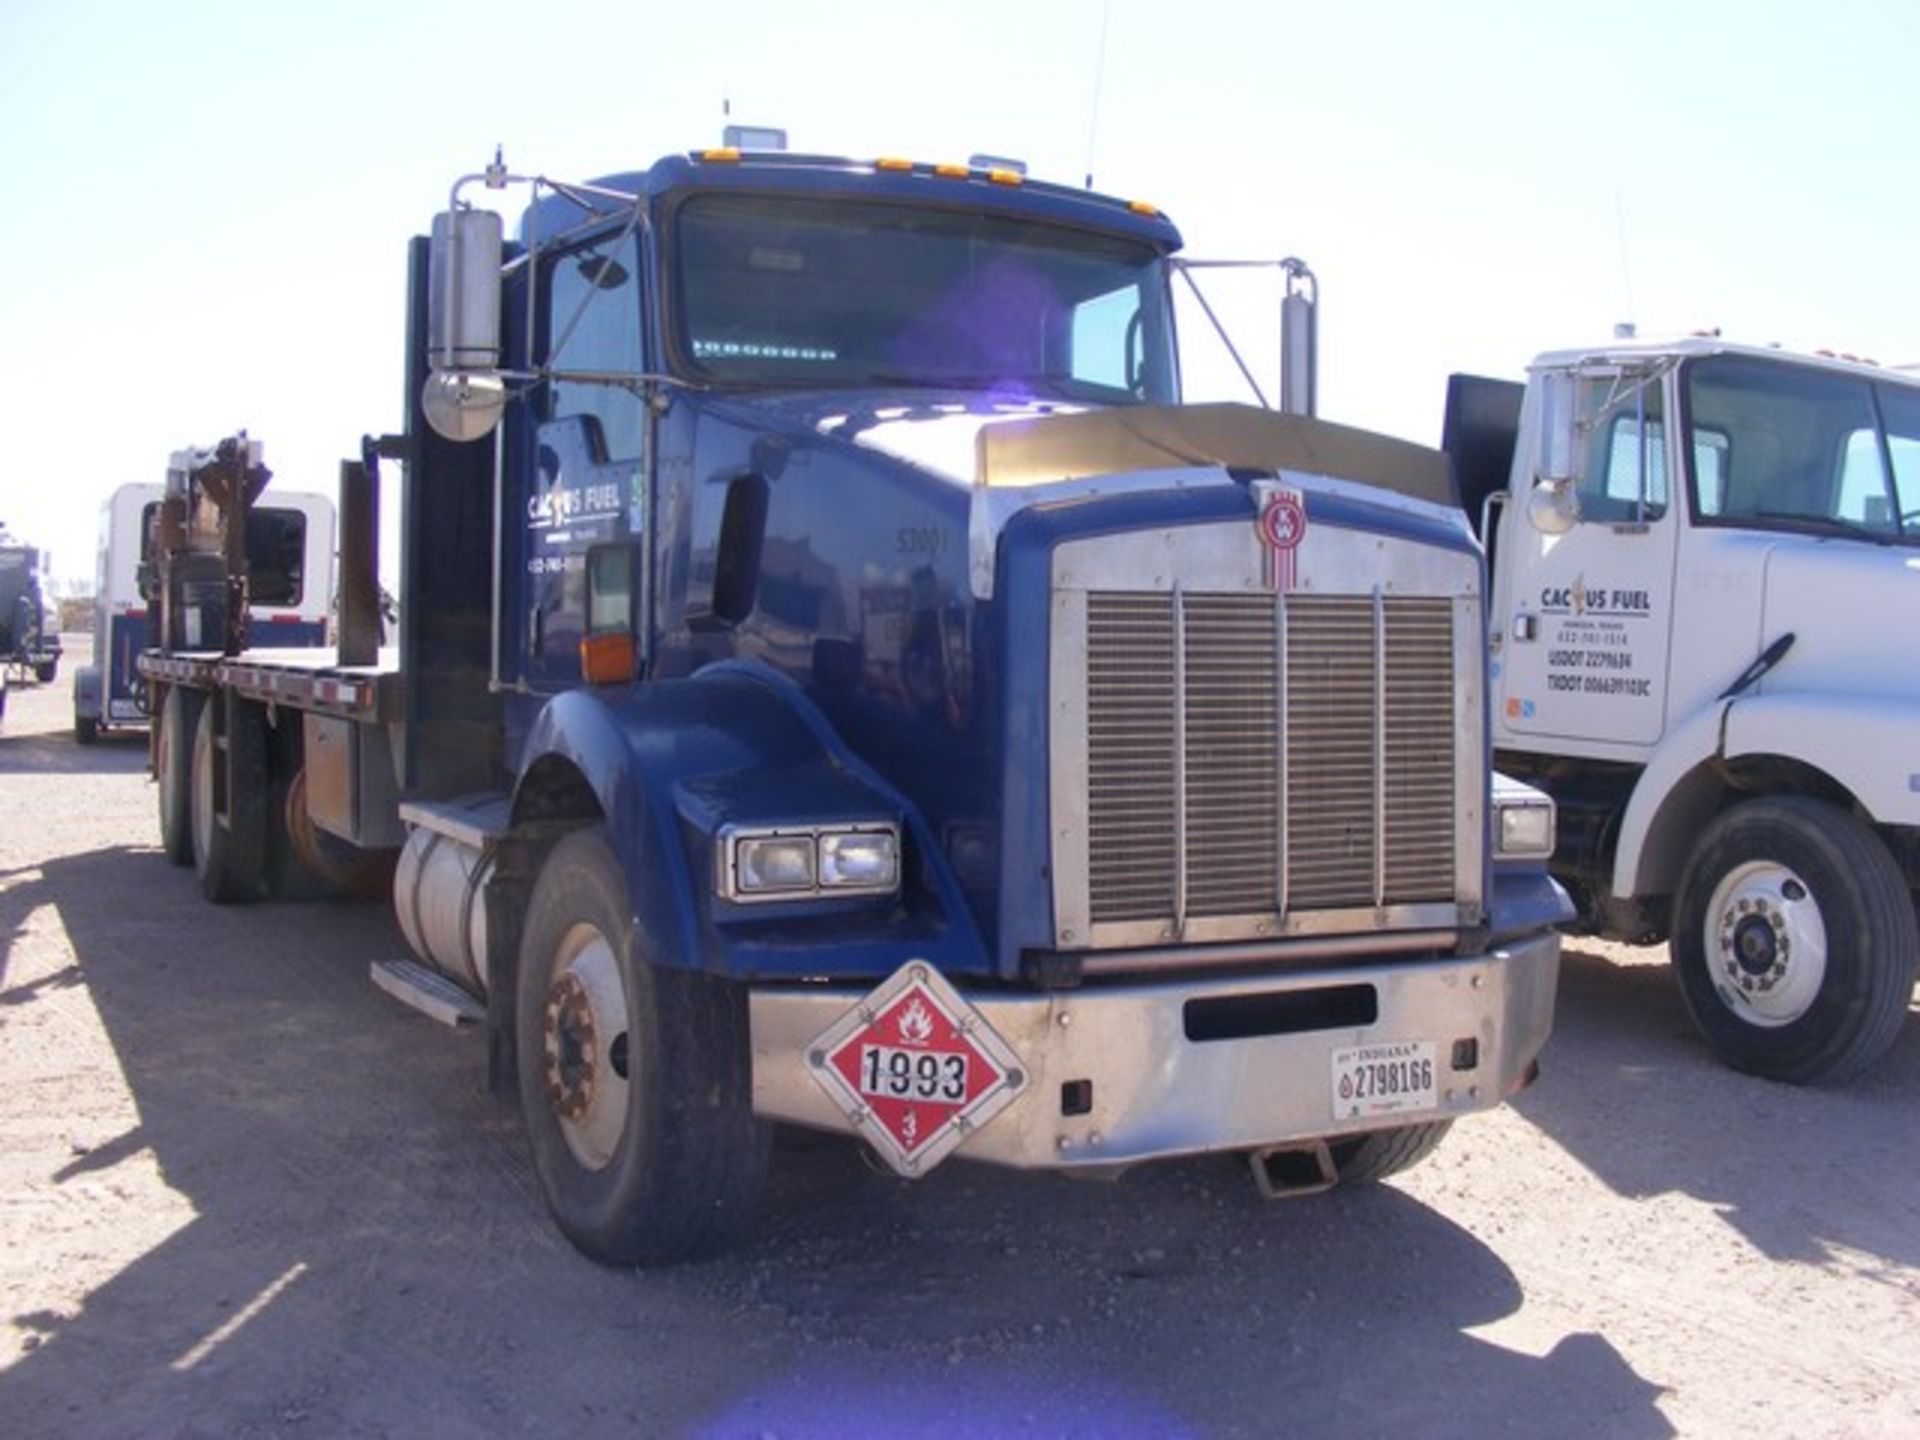 Located in YARD 1 - Midland, TX (6128) (X) 2009 KENWORTH T800, T/A DAY CAB STAKE BED DELIVERY TRUCK, - Image 2 of 10